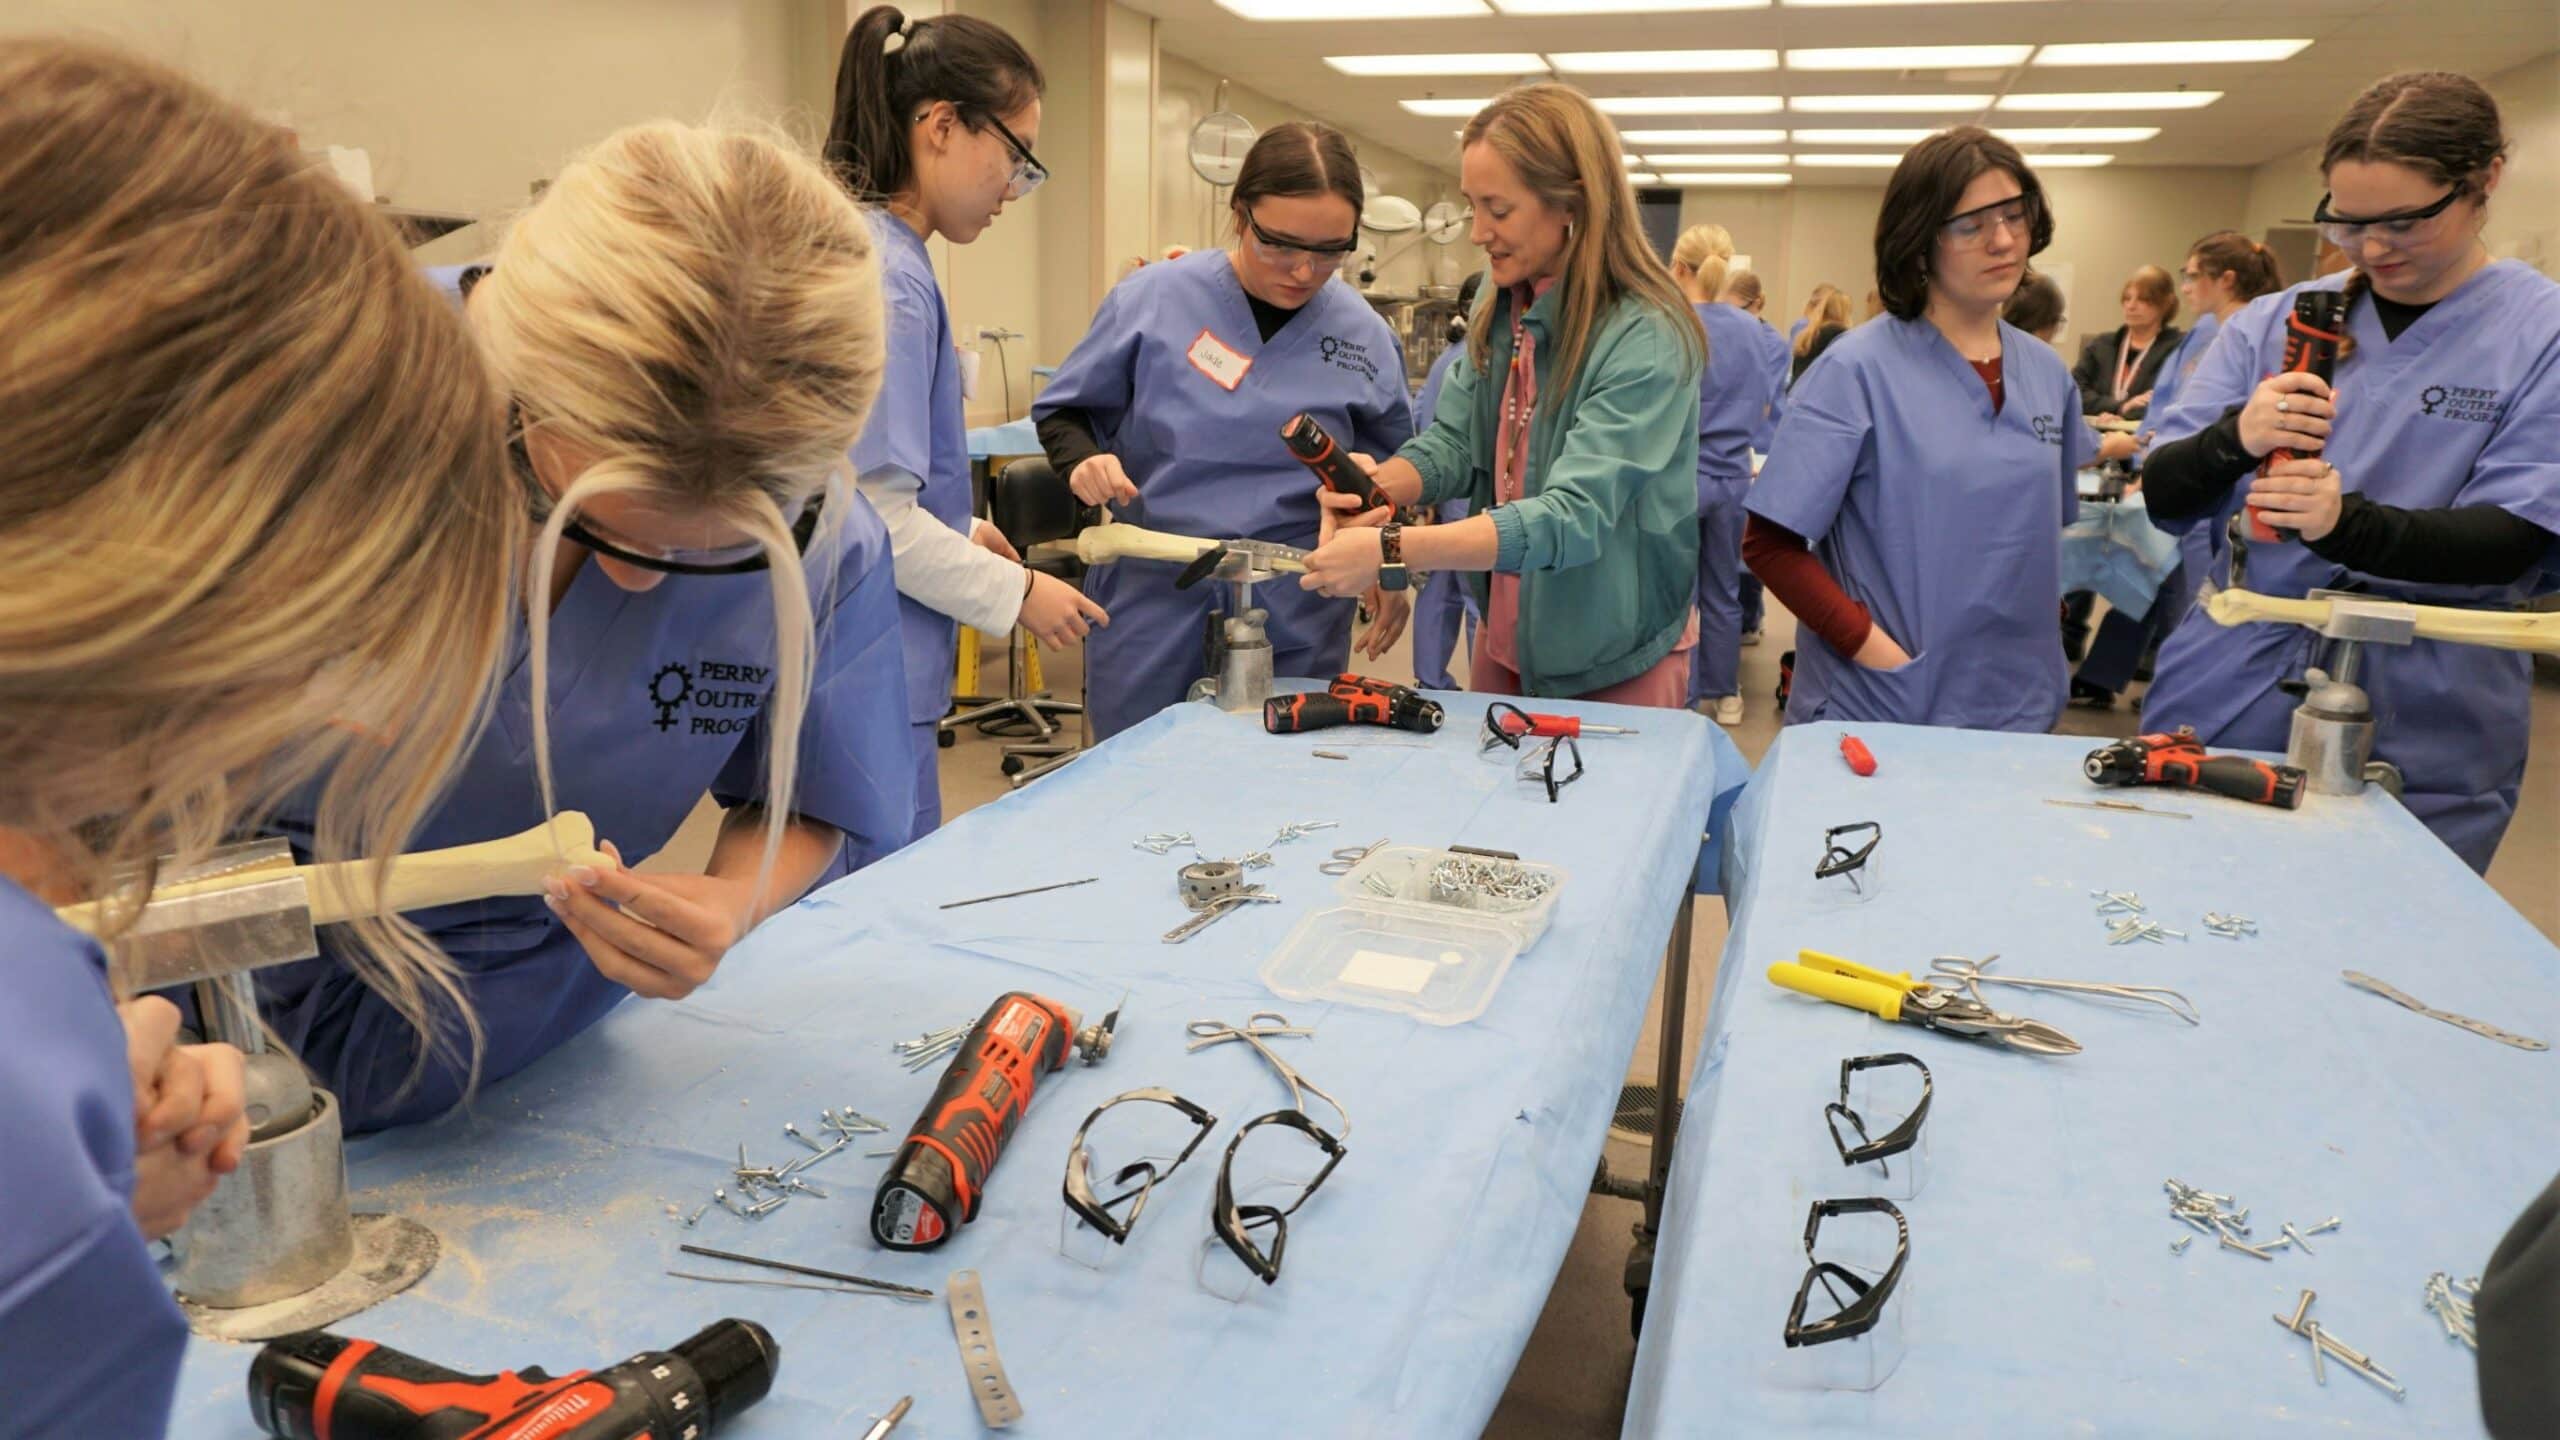 Theresa Wyrick, M.D., (center) instructs high school students during a hands-on session of the Perry Outreach Program workshop at UAMS.